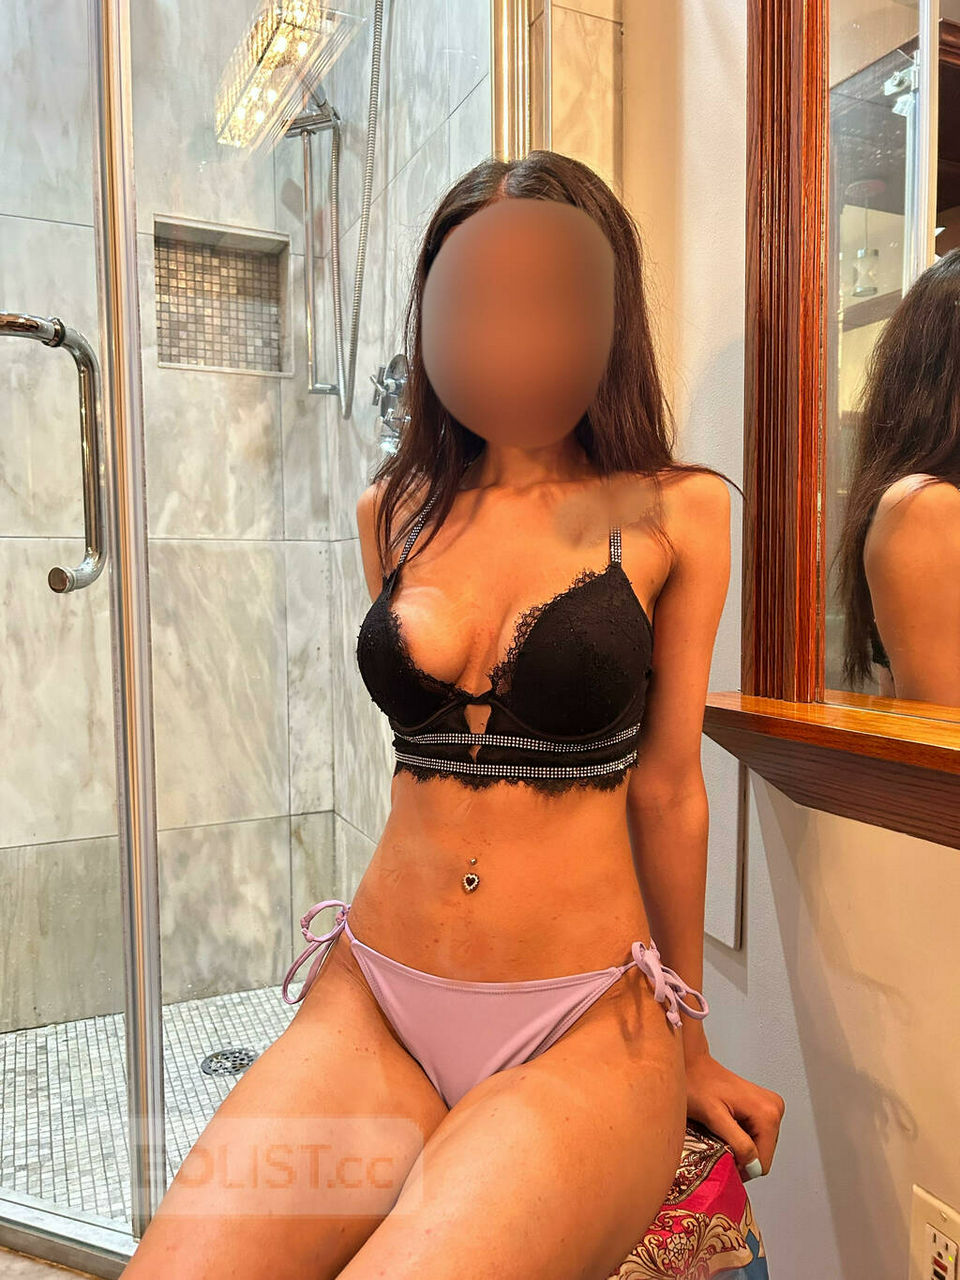 Escorts North York, Ontario WET WEDNESDAY**SEXY GIRLS AVAILABLE** YORKDALE** UNTIL 4AM